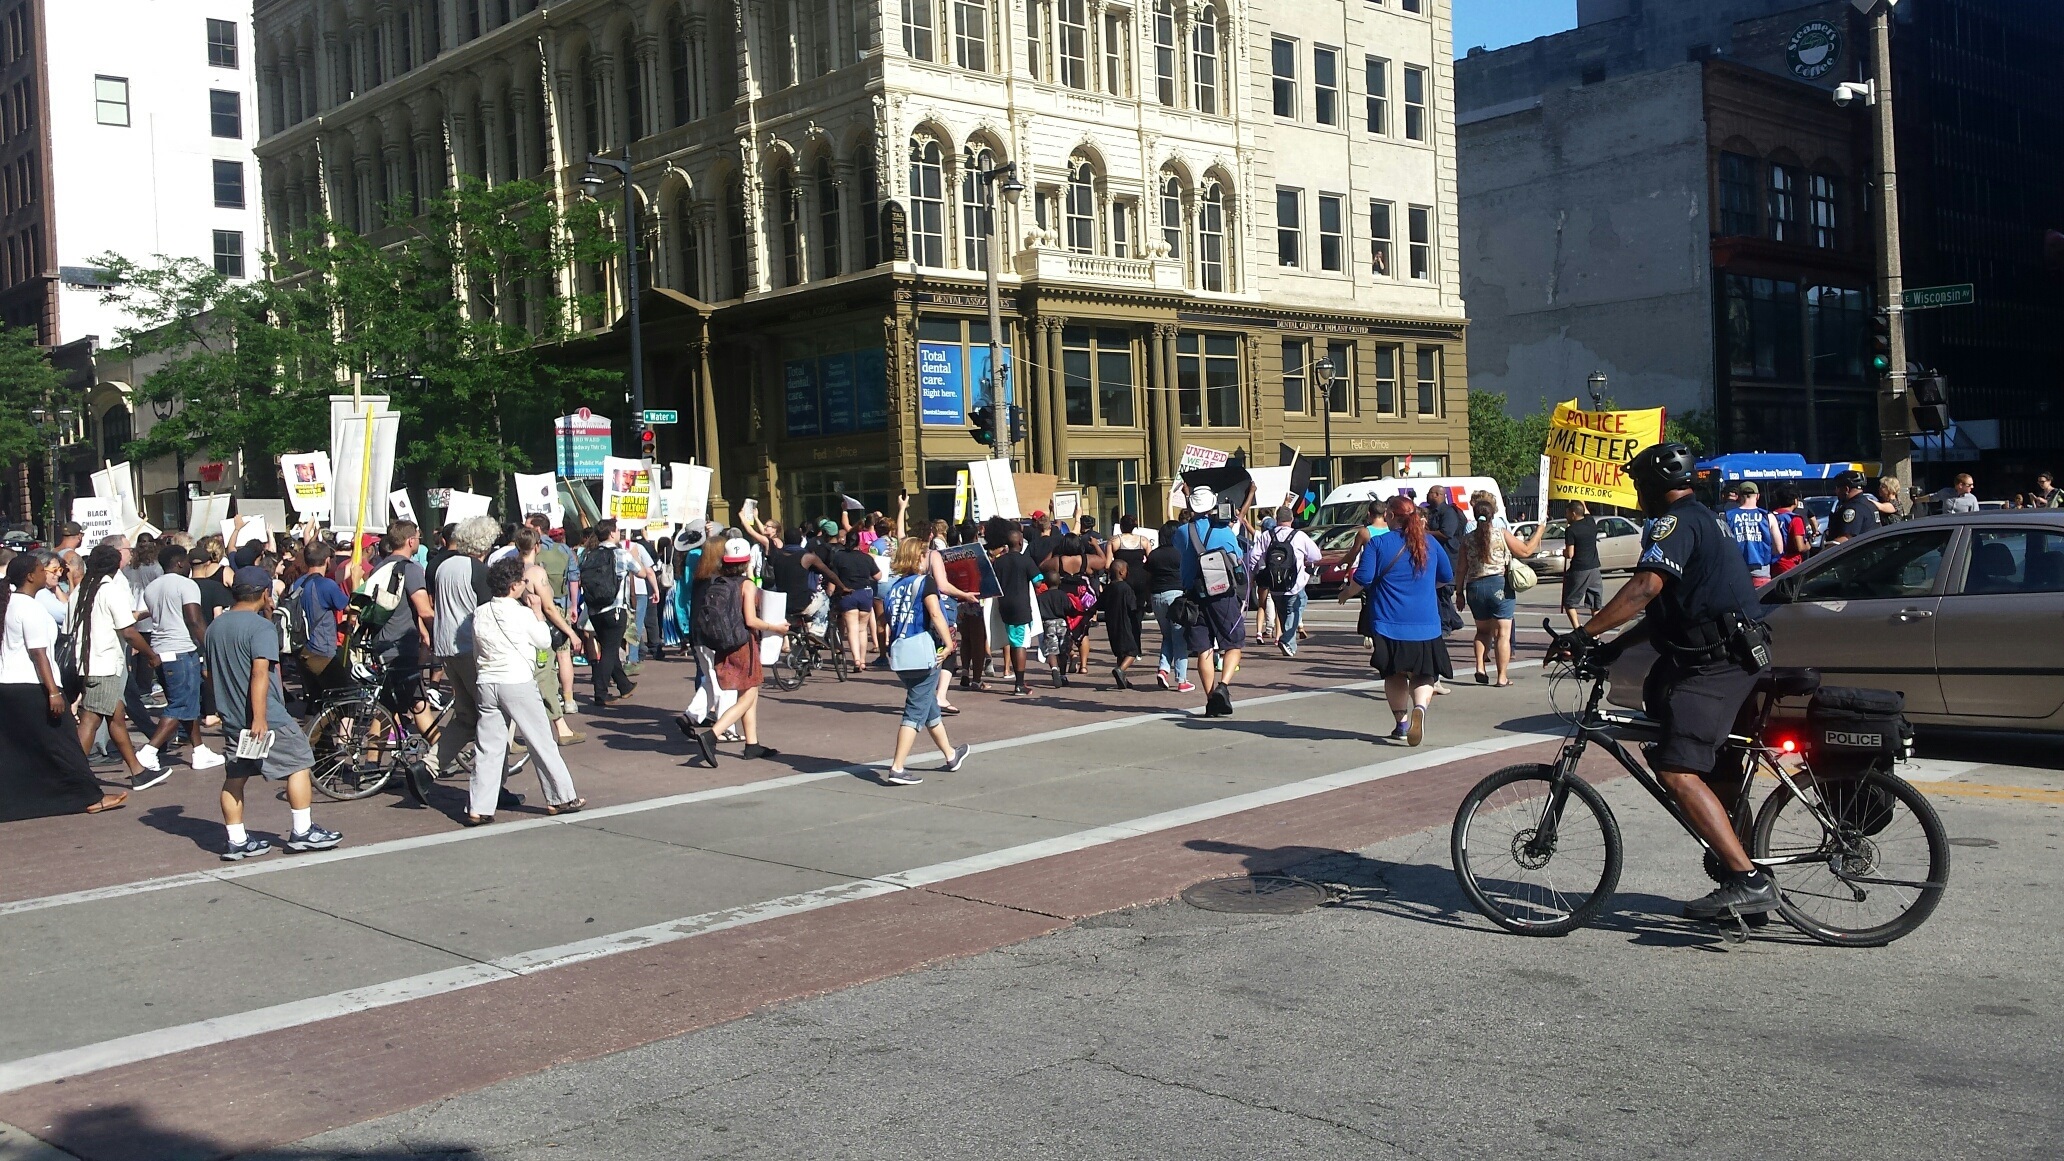 Protesters block an a intersection in downtown Milwaukee, as a police officer on a bicycle looks on.